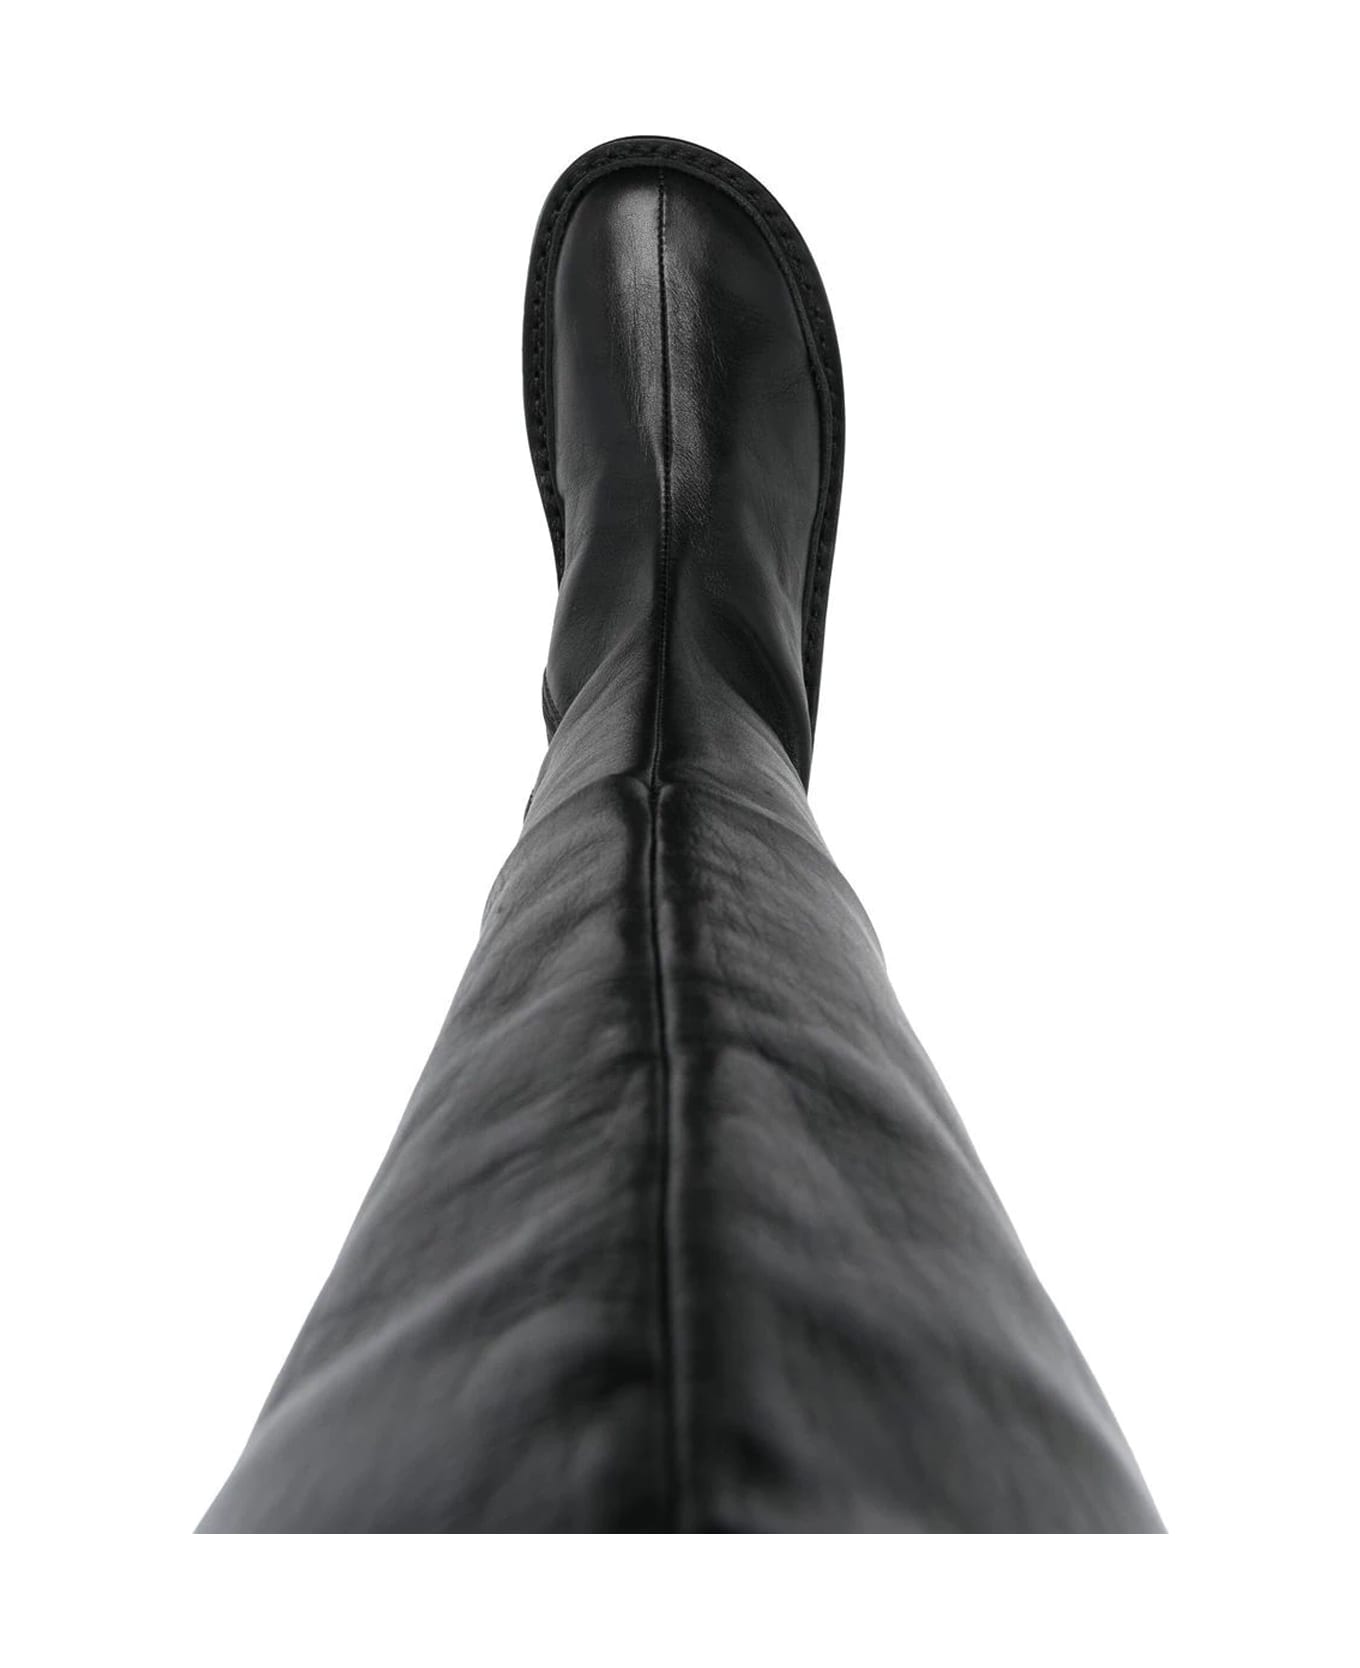 Trippen Stage Boots With Side Zip - Black